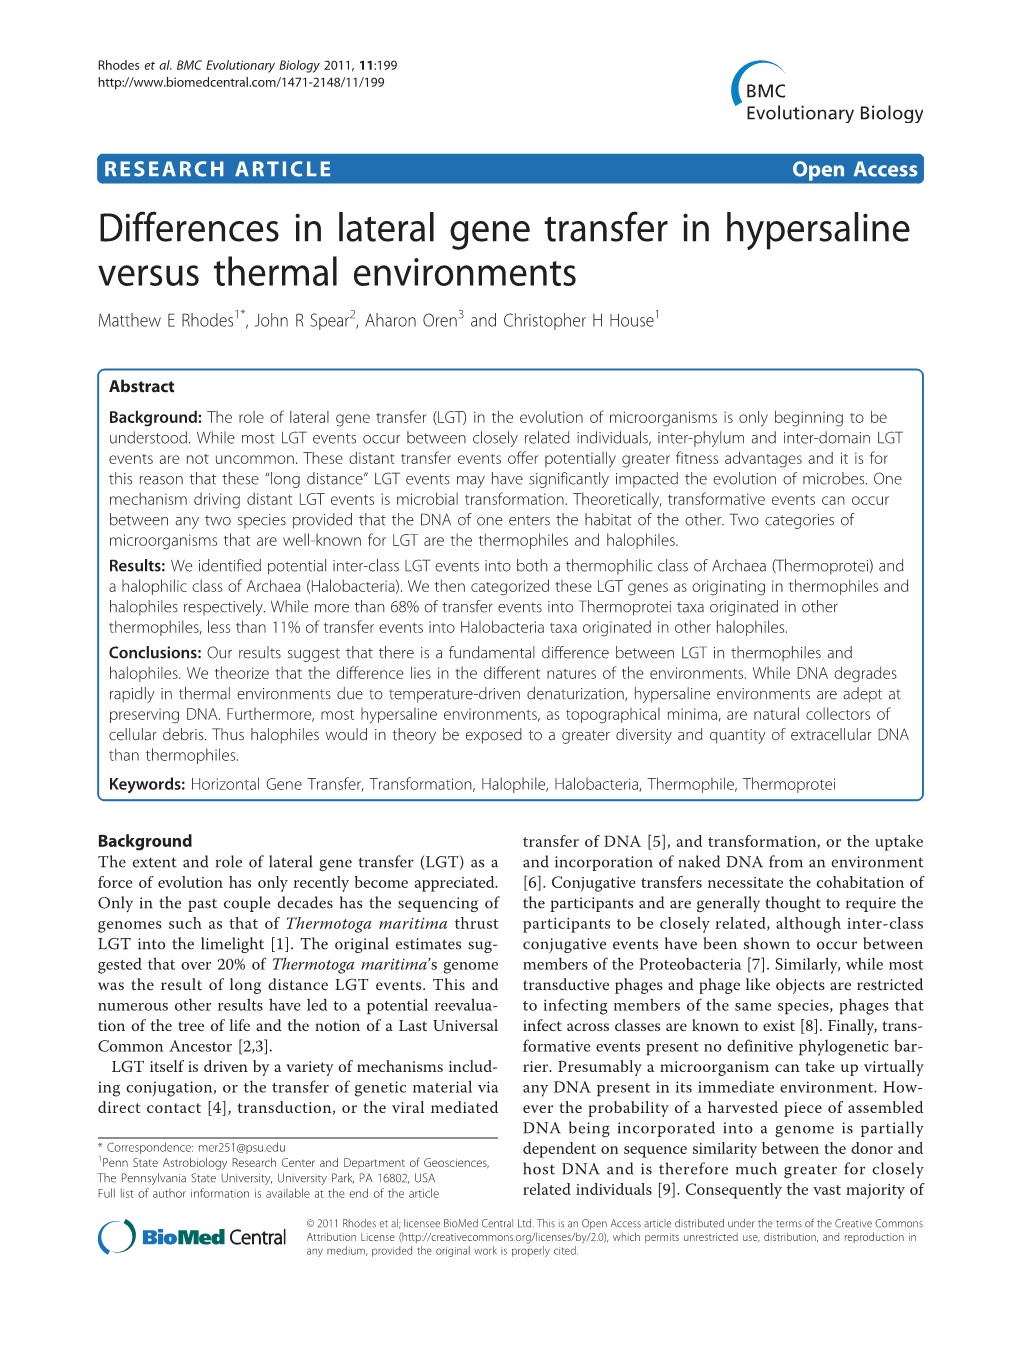 Differences in Lateral Gene Transfer in Hypersaline Versus Thermal Environments Matthew E Rhodes1*, John R Spear2, Aharon Oren3 and Christopher H House1